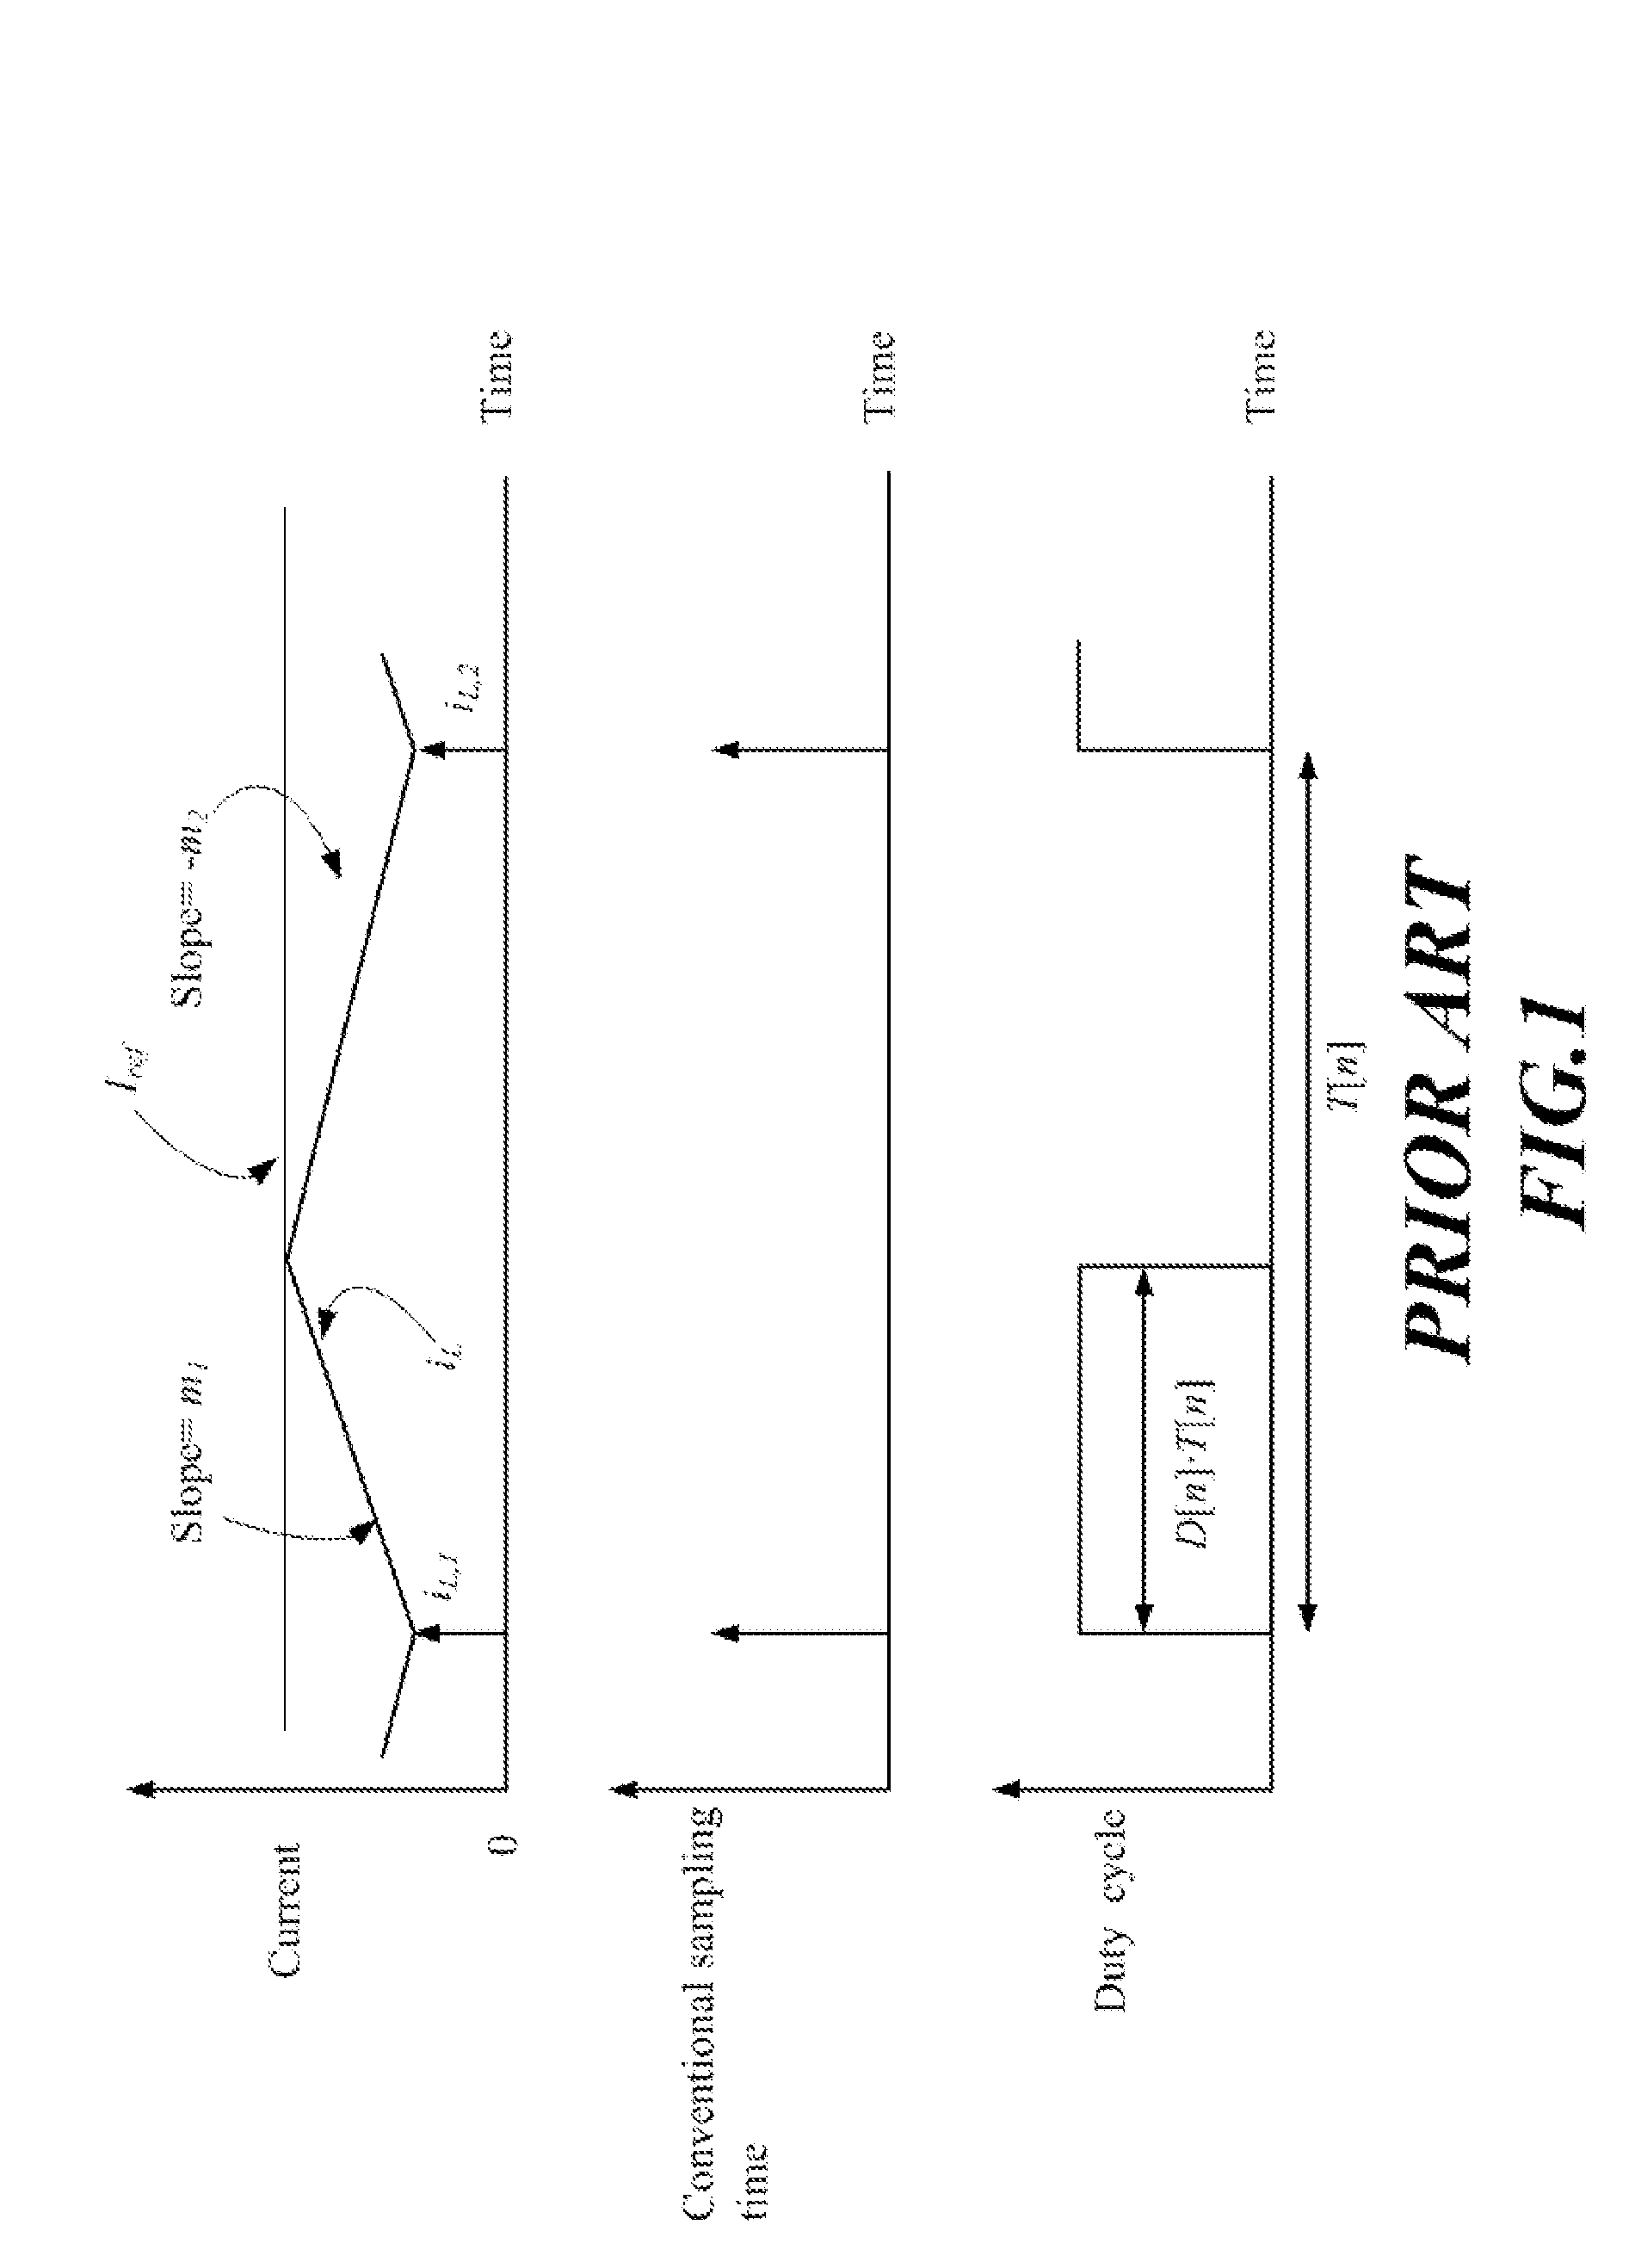 Driving control device and method for power converting system